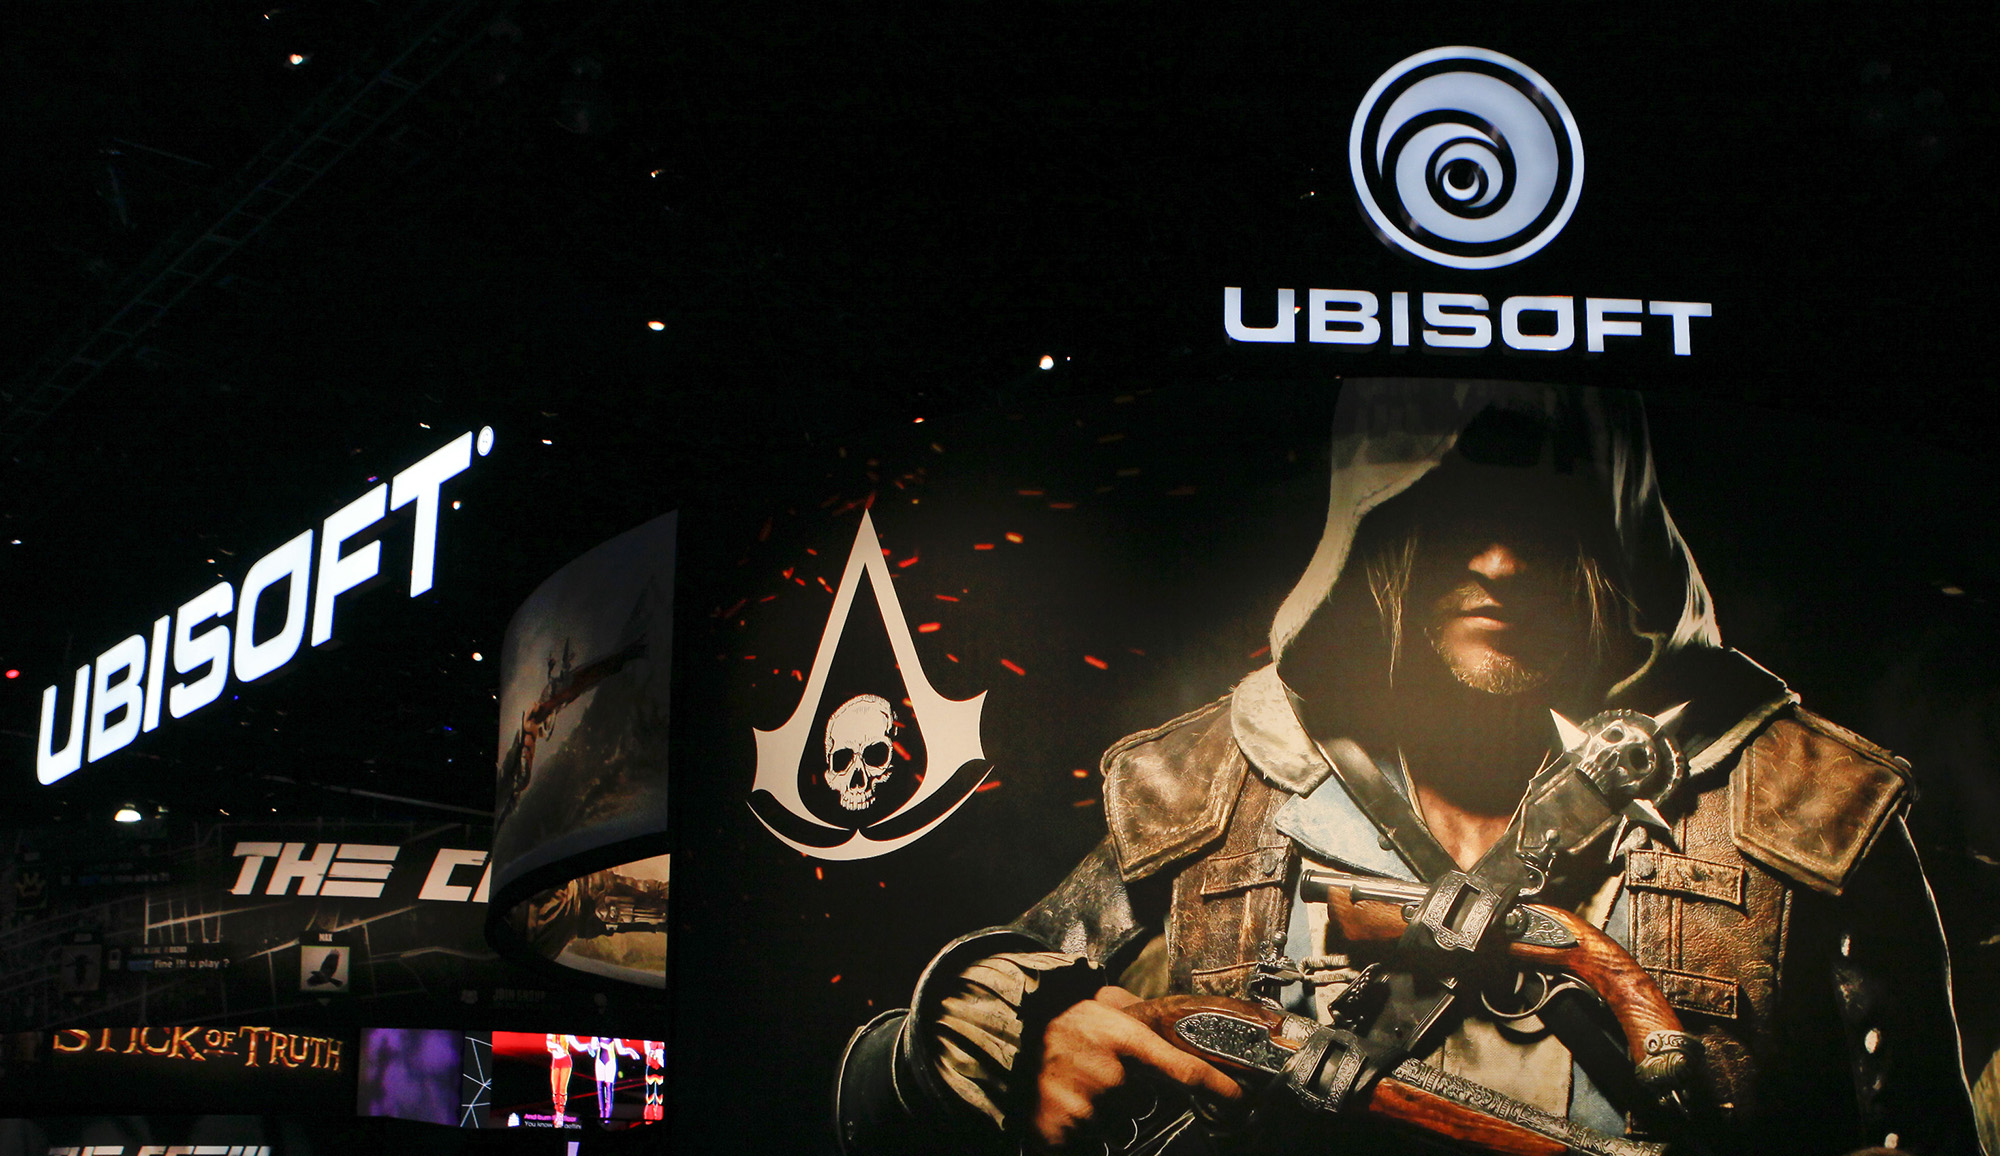 UbiSoft's Assassin's Creed IV: Black Flag video game&nbsp;during the E3 Electronic Entertainment Expo in Los Angeles in 2013.&nbsp;